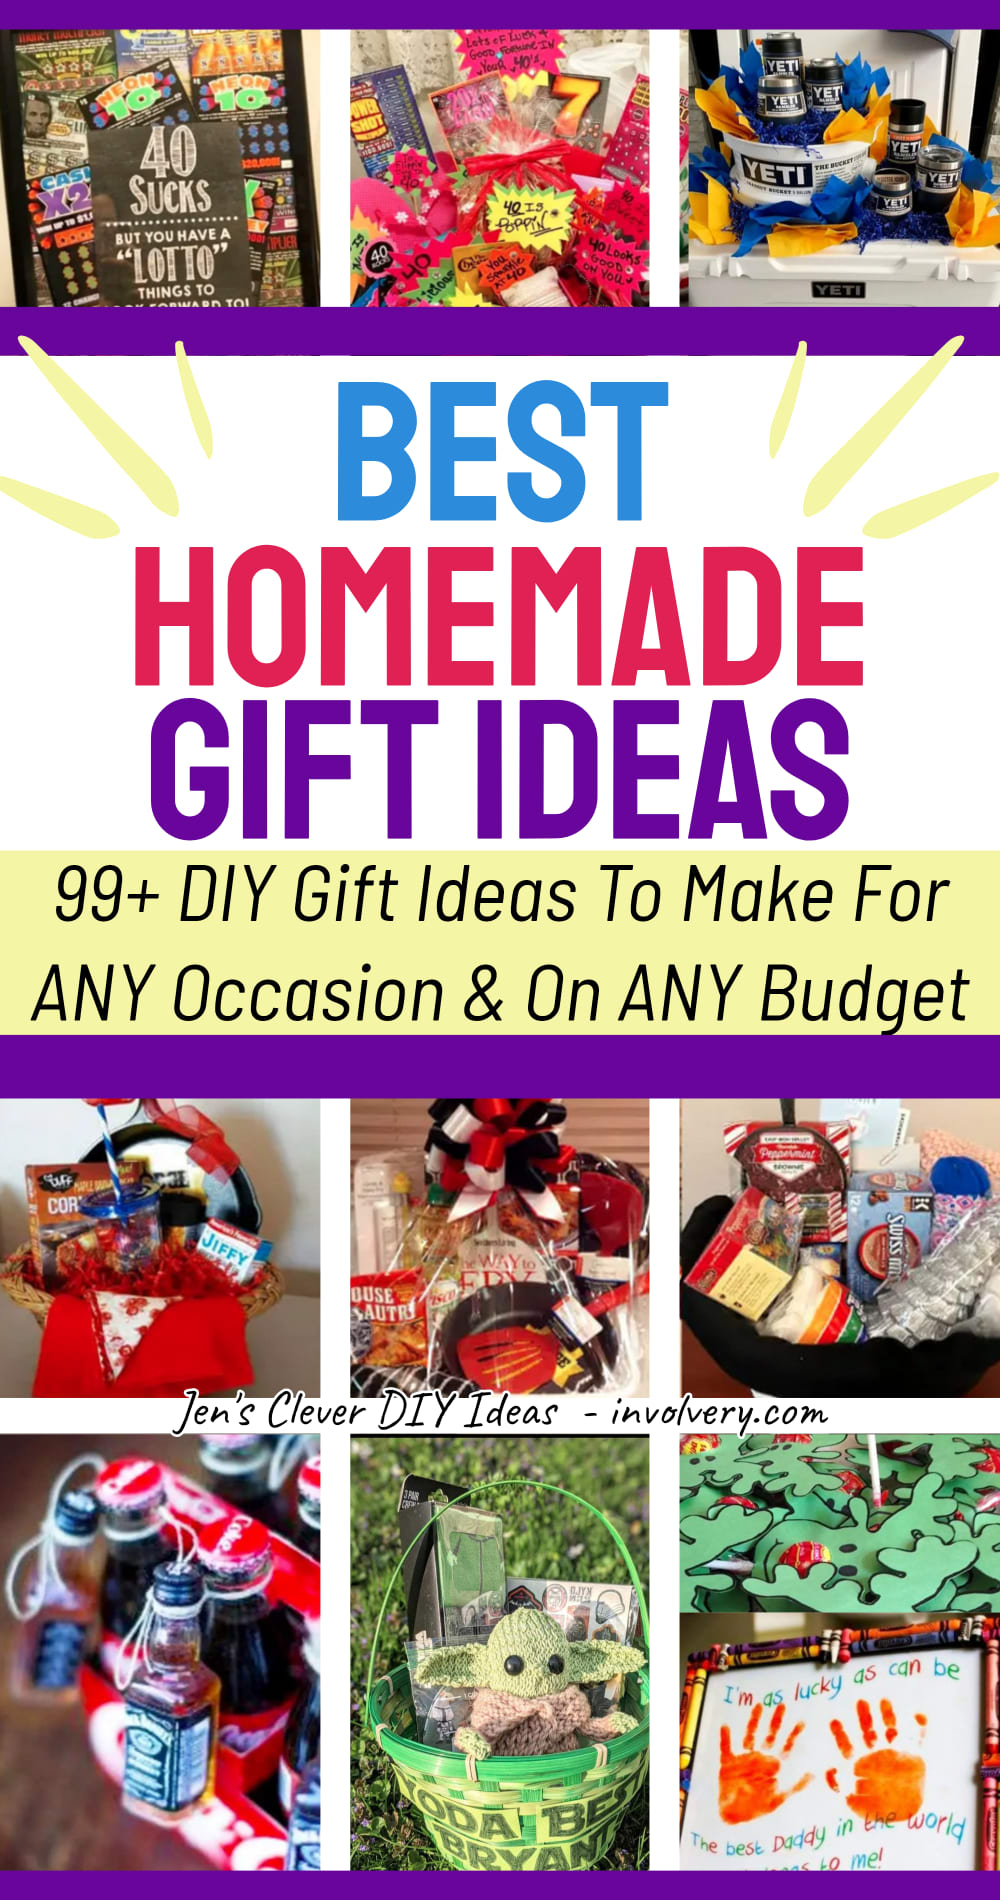 Best homemade gift ideas - 99+ DIY gift ideas to make for ANY occasion, holiday, party or fundraiser on ANY budget. Creative, inexpensive and EASY handmade gift baskets, presents and much more.